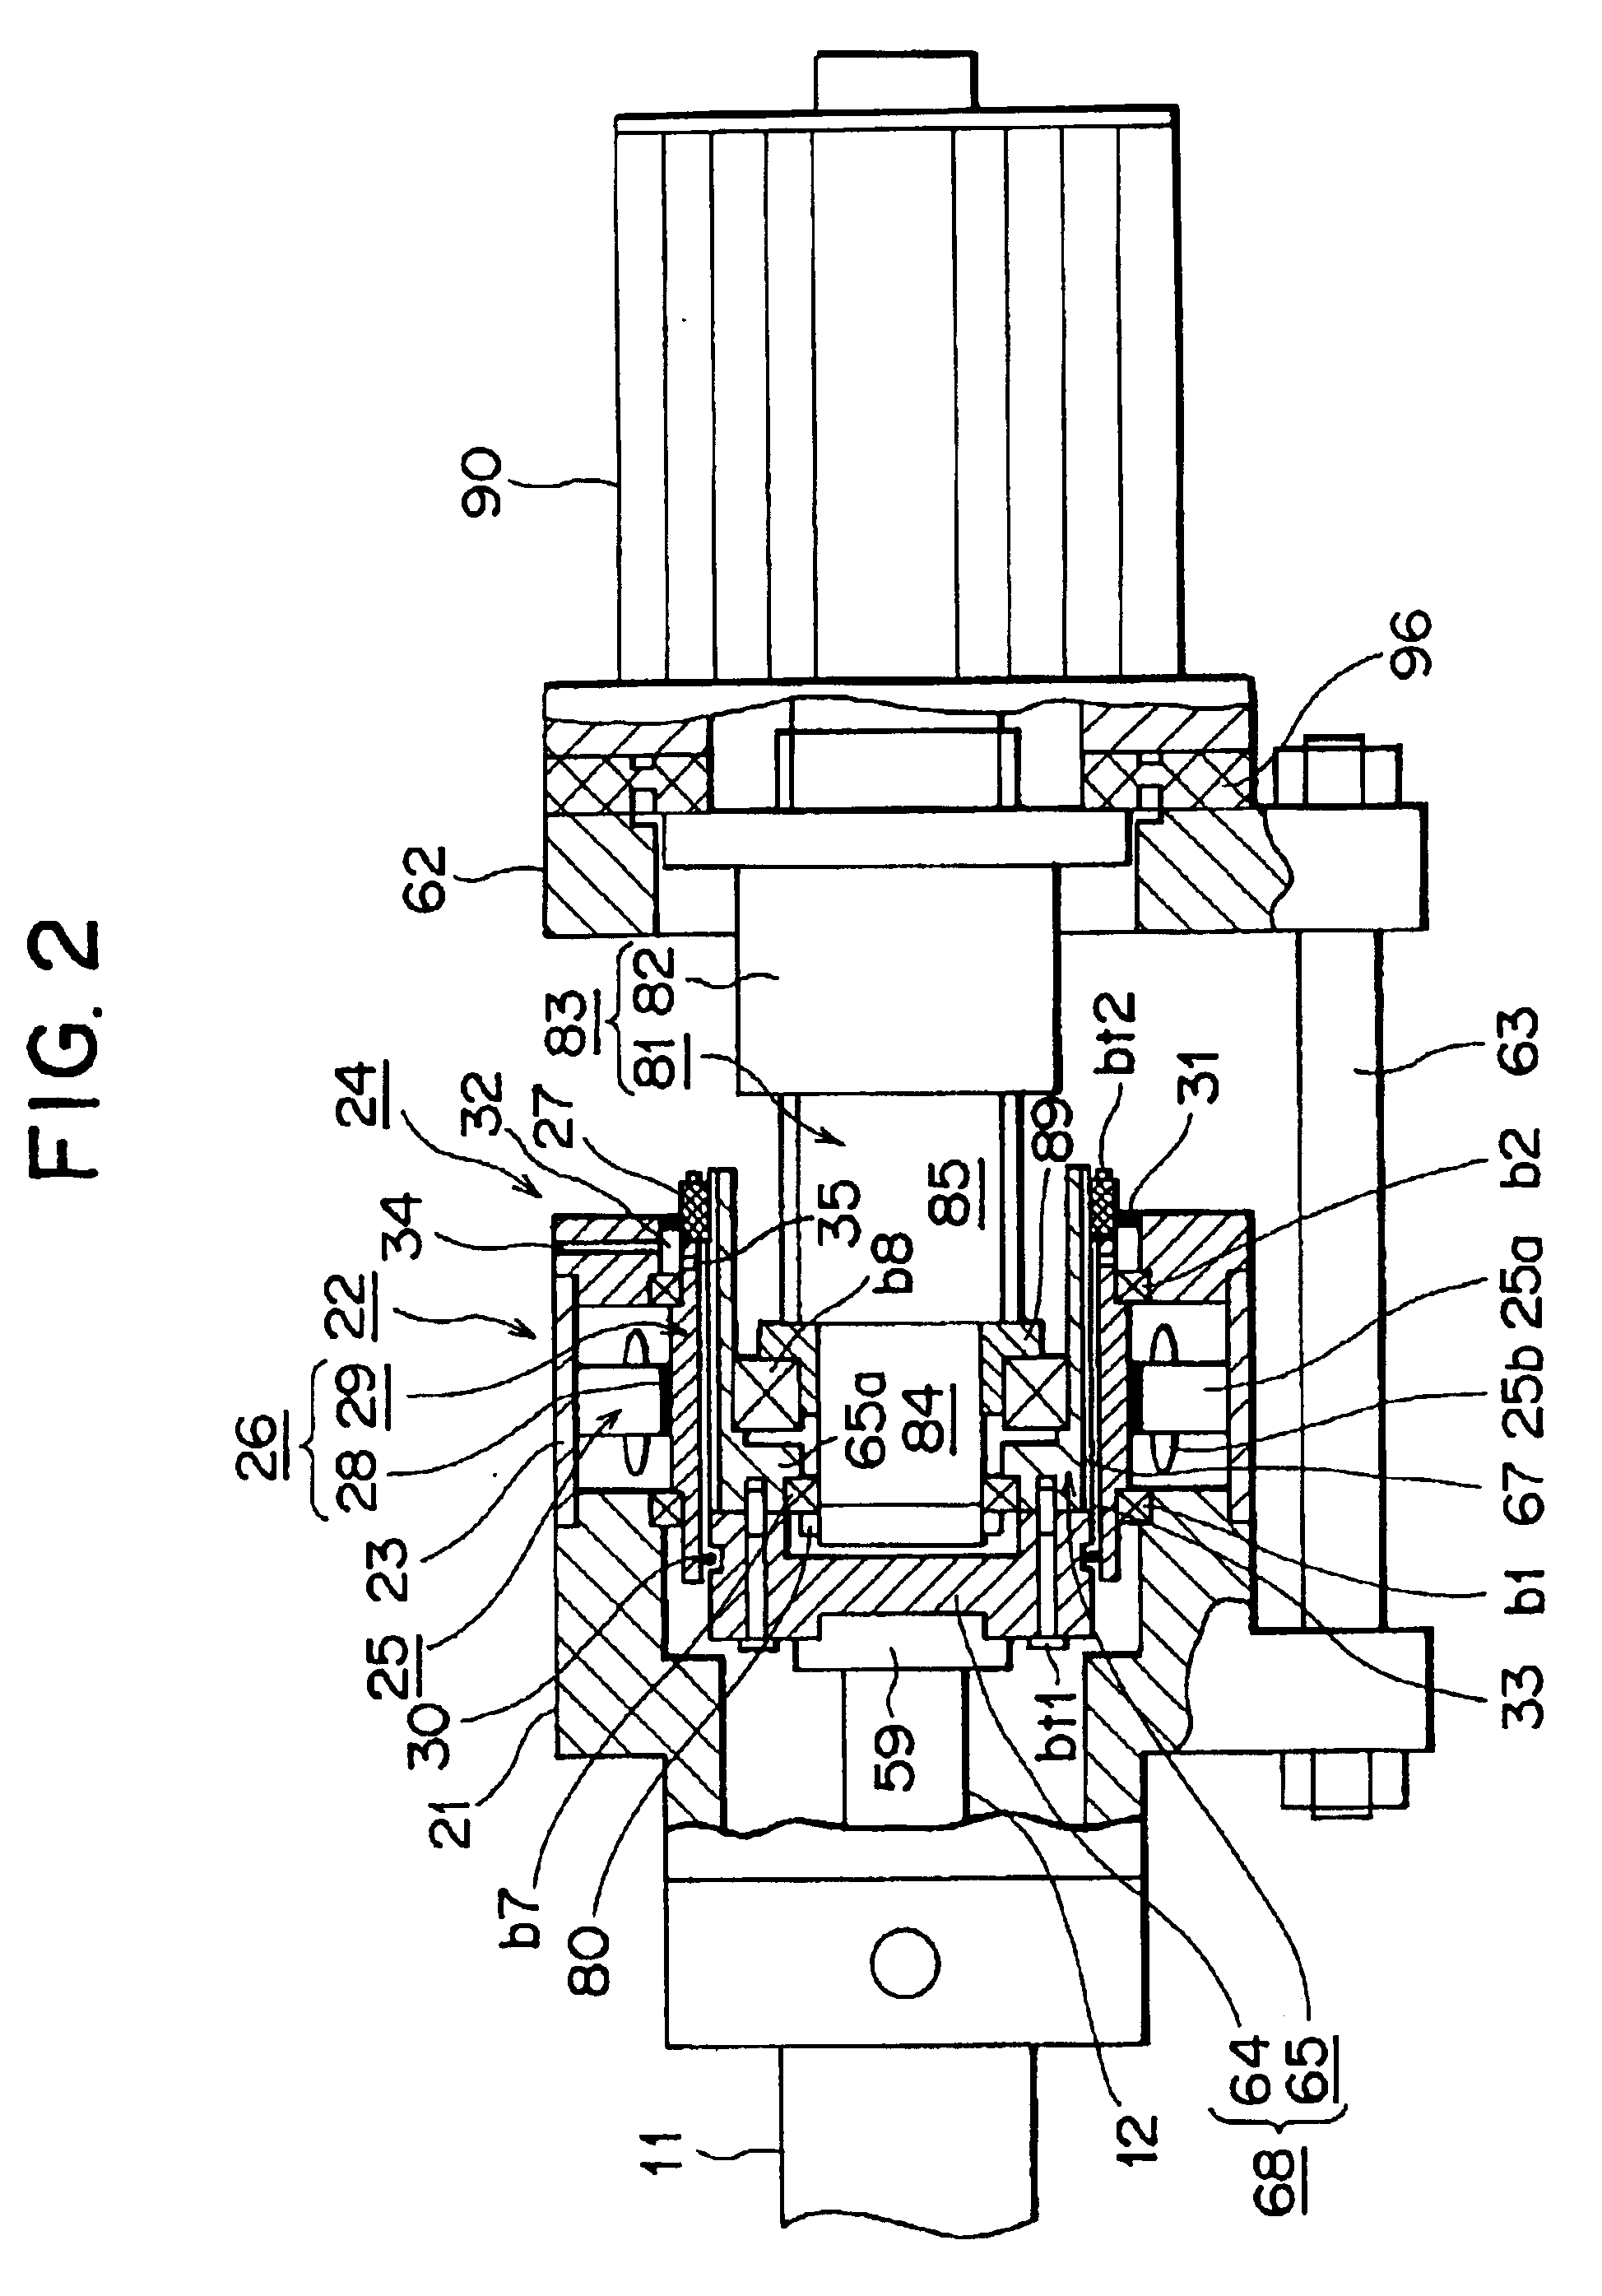 Injection apparatus